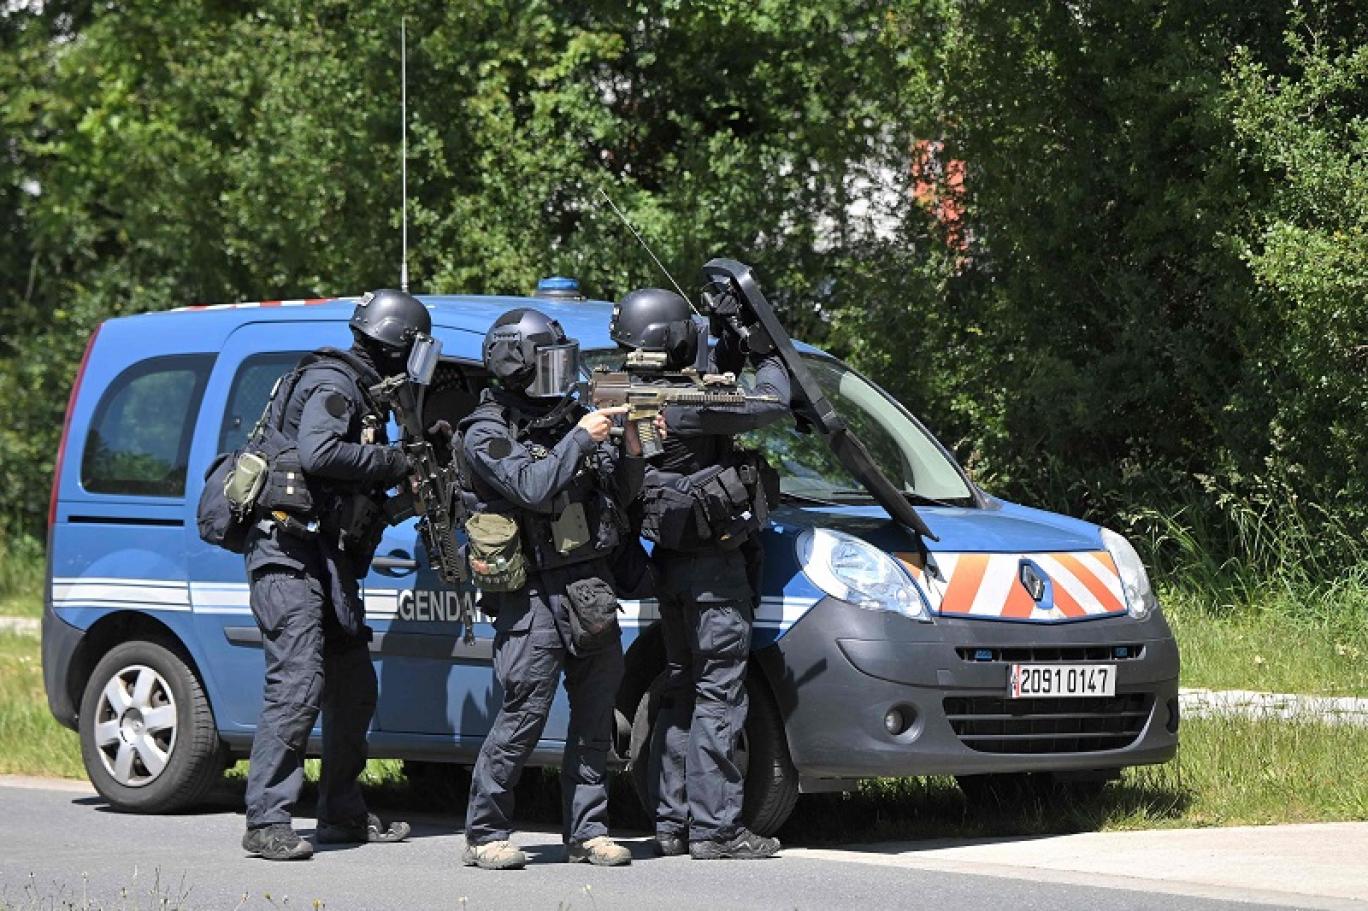 Counter terrorism in France, Police officer wounded in knife attack